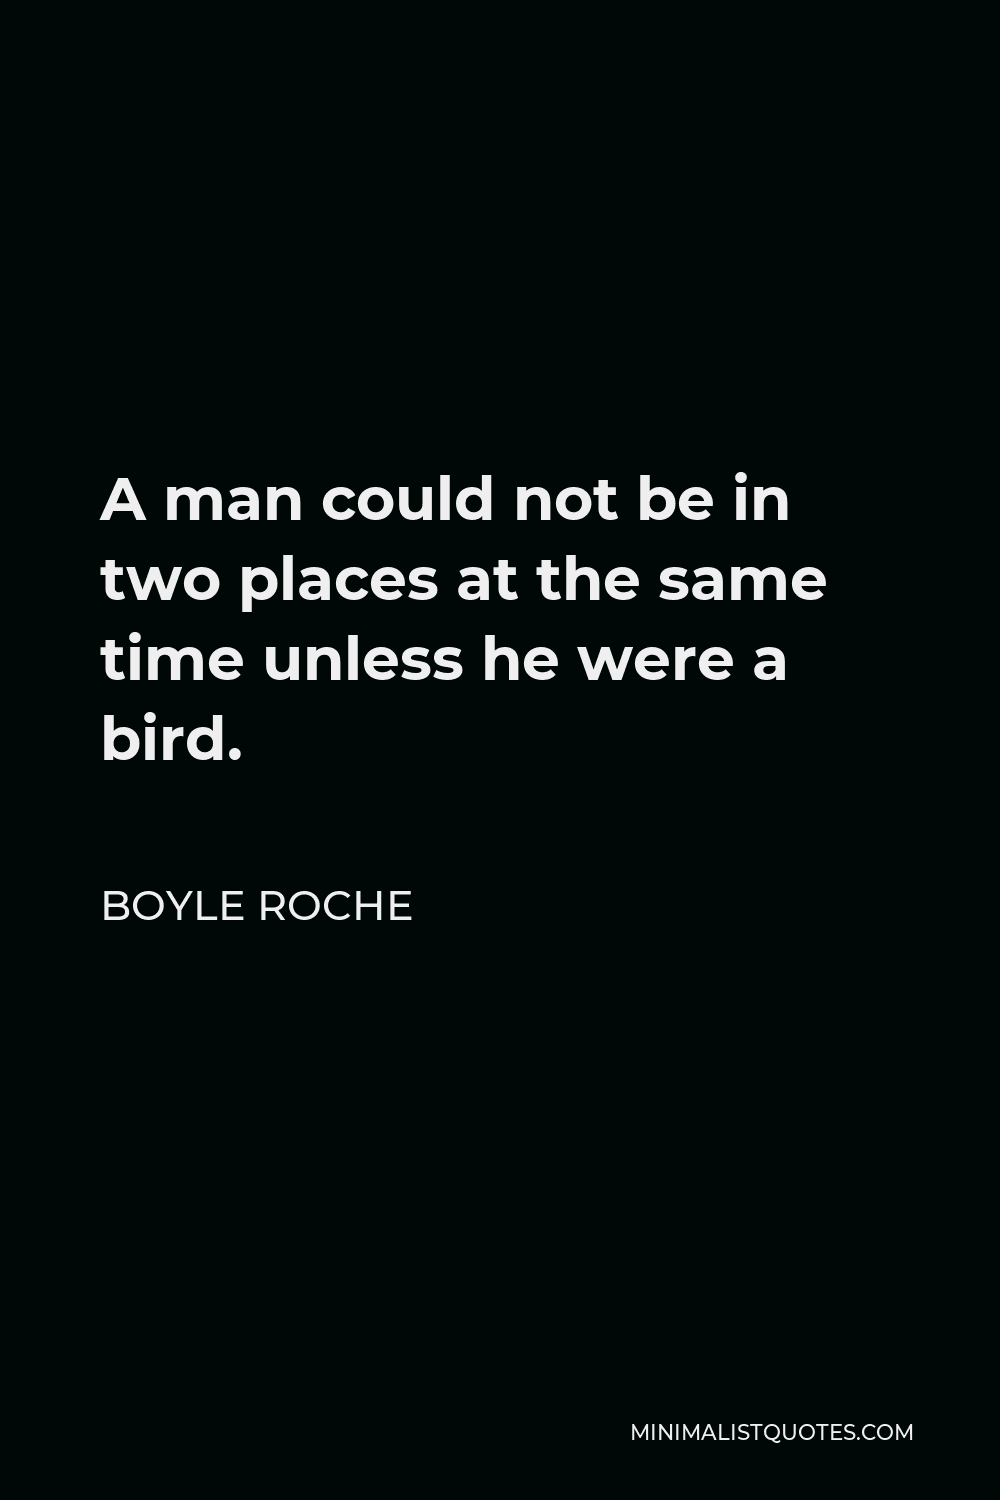 Boyle Roche Quote - A man could not be in two places at the same time unless he were a bird.